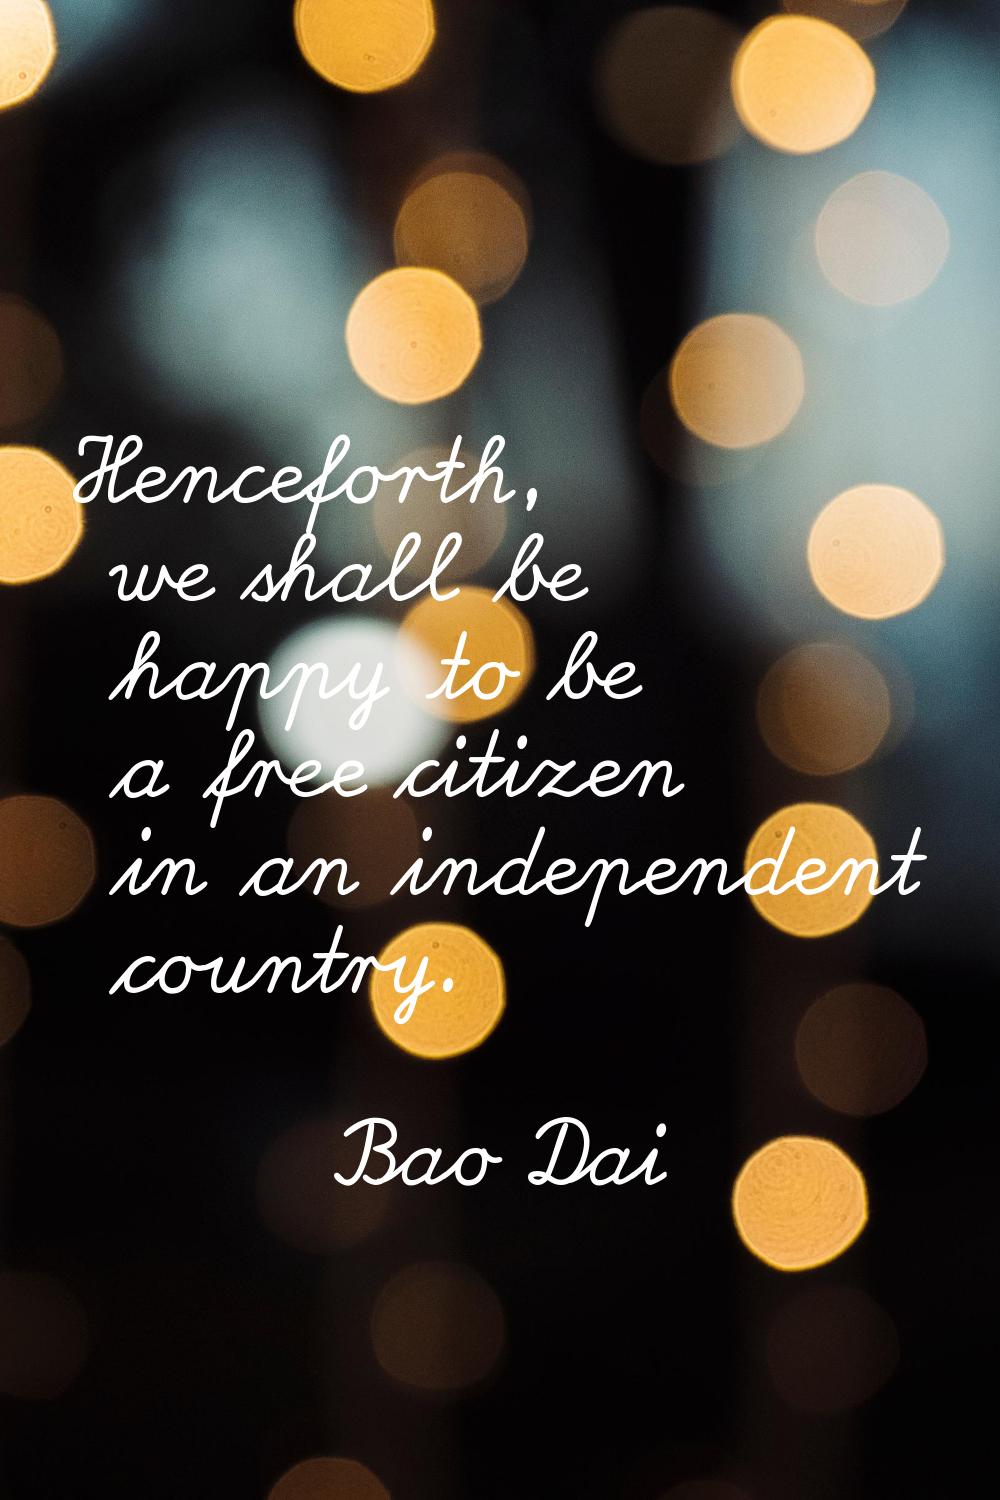 Henceforth, we shall be happy to be a free citizen in an independent country.